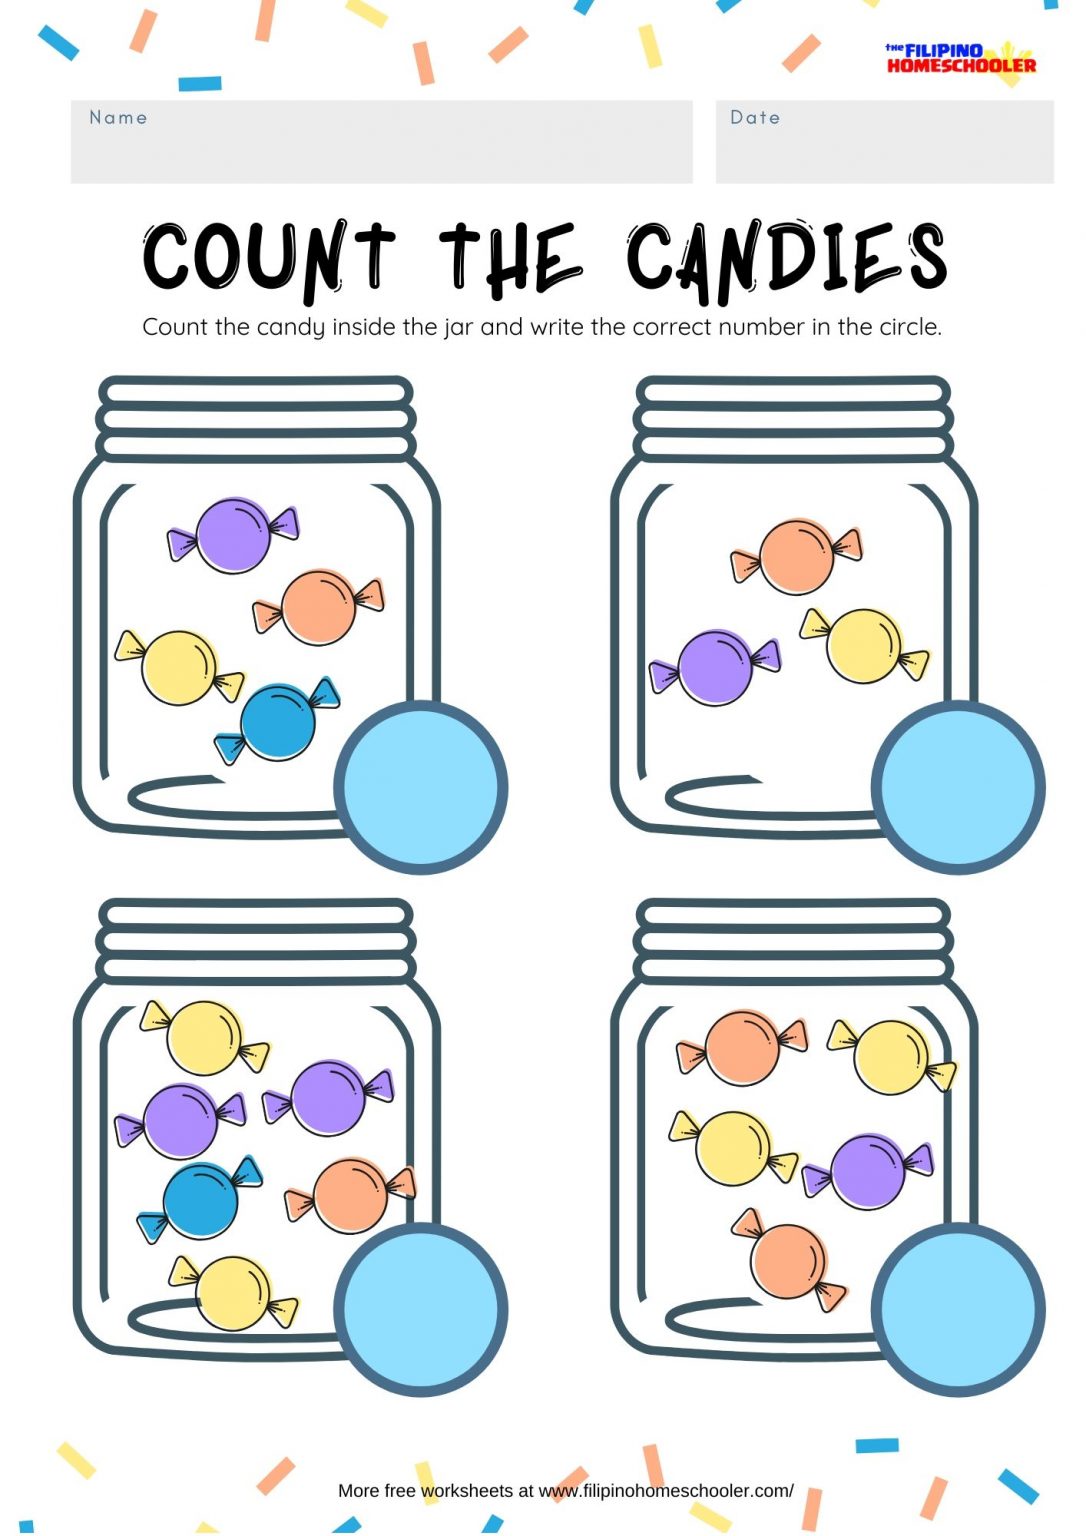 math-counting-worksheet-count-the-candies-the-filipino-homeschooler